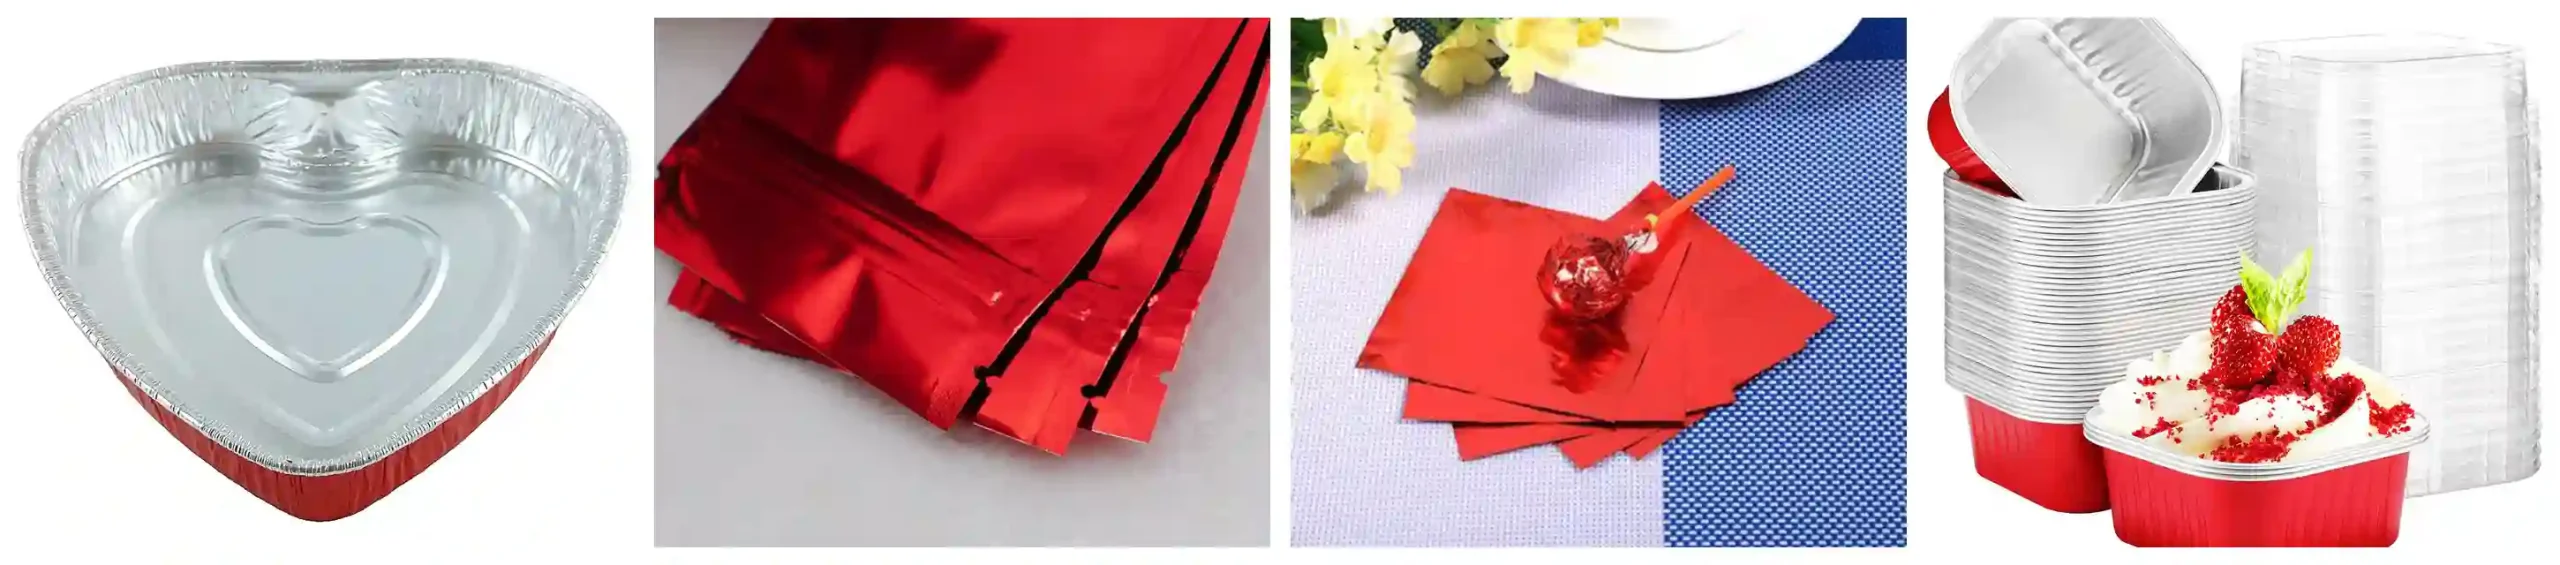 red aluminum foil for food-grade lunch boxes or containers, a wrapper for chocolate candies, cigarette packaging